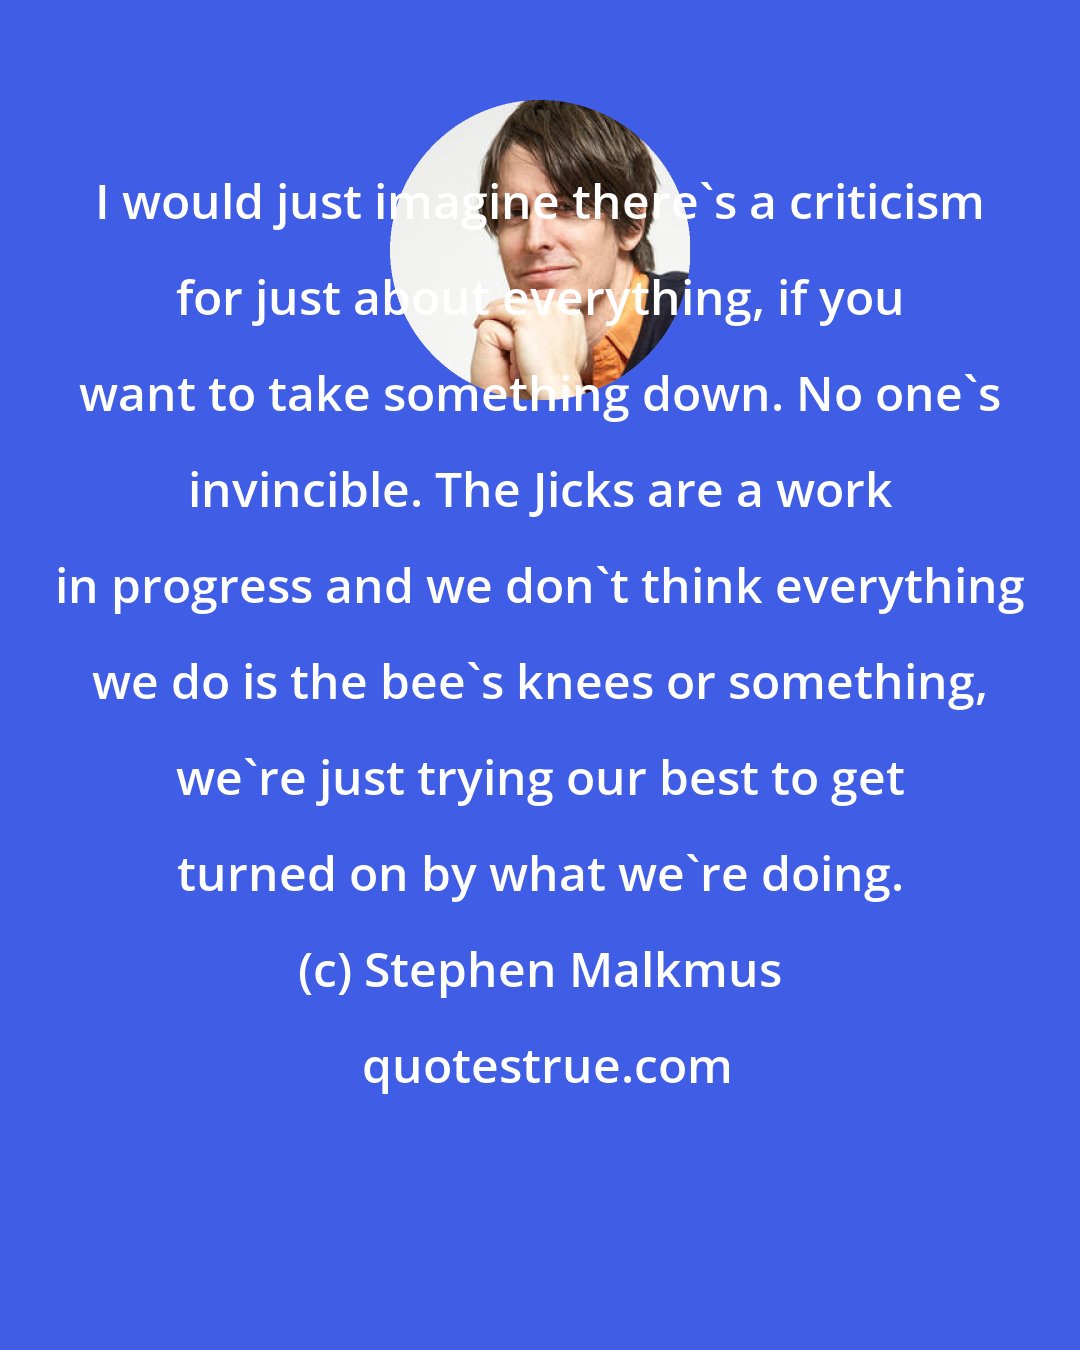 Stephen Malkmus: I would just imagine there's a criticism for just about everything, if you want to take something down. No one's invincible. The Jicks are a work in progress and we don't think everything we do is the bee's knees or something, we're just trying our best to get turned on by what we're doing.